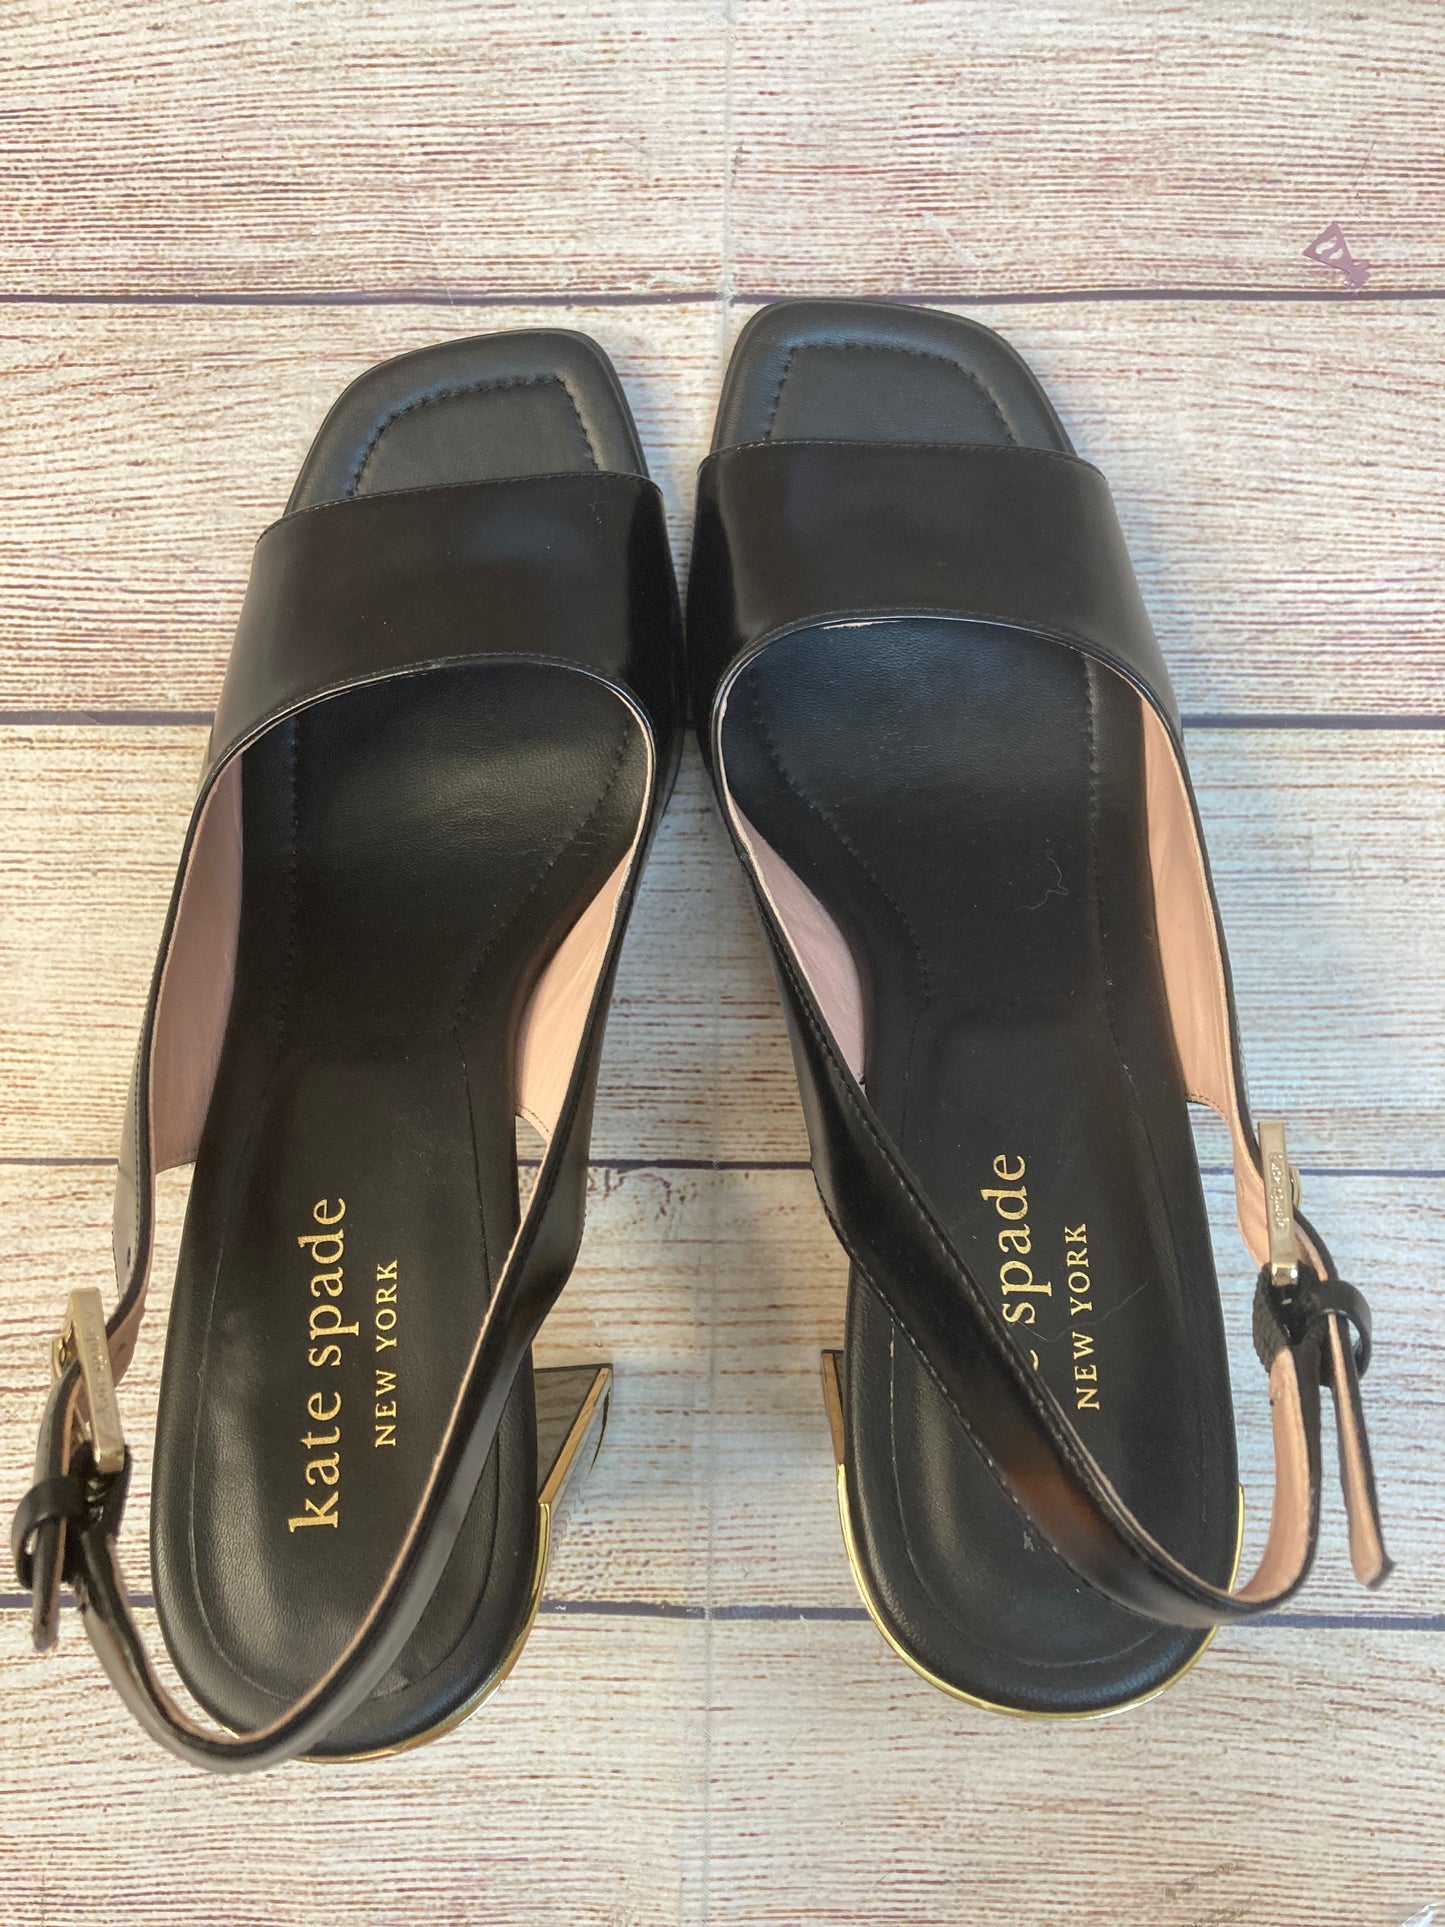 Shoes Designer By Kate Spade  Size: 9